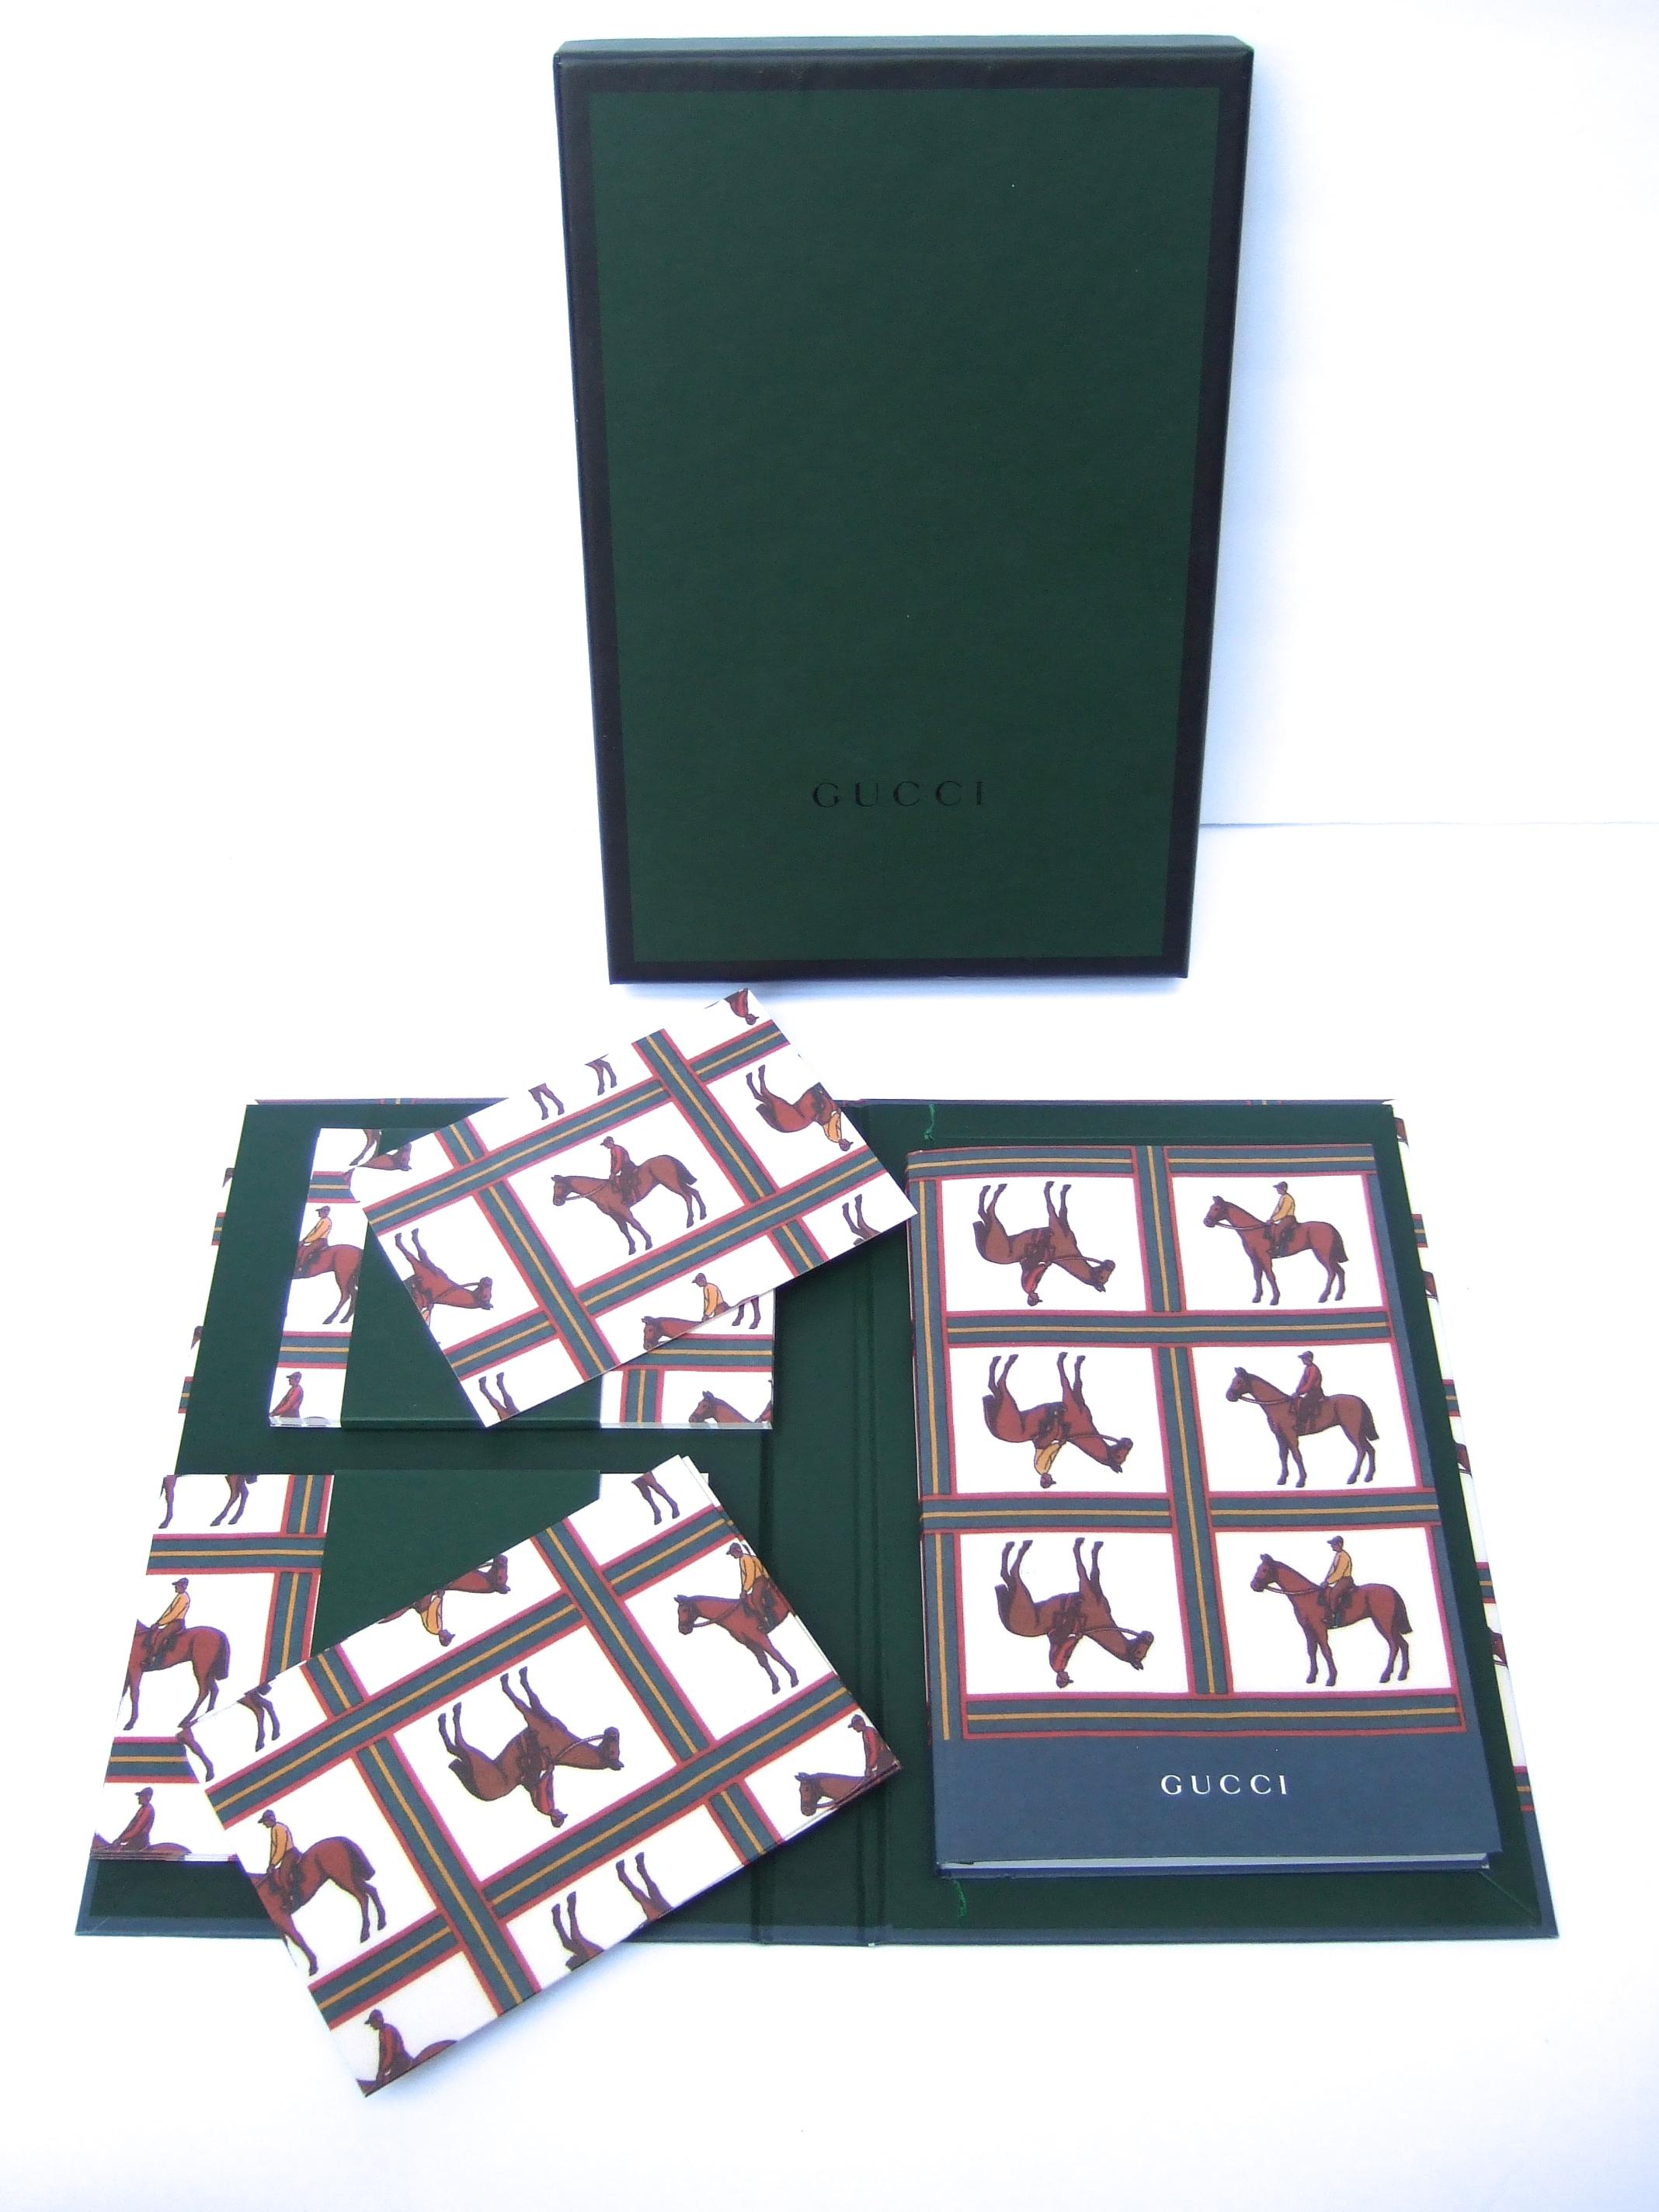 Women's or Men's Gucci Equine Design Note Cards & Journal Book Stationery Set in Gucci Box c 1990 For Sale